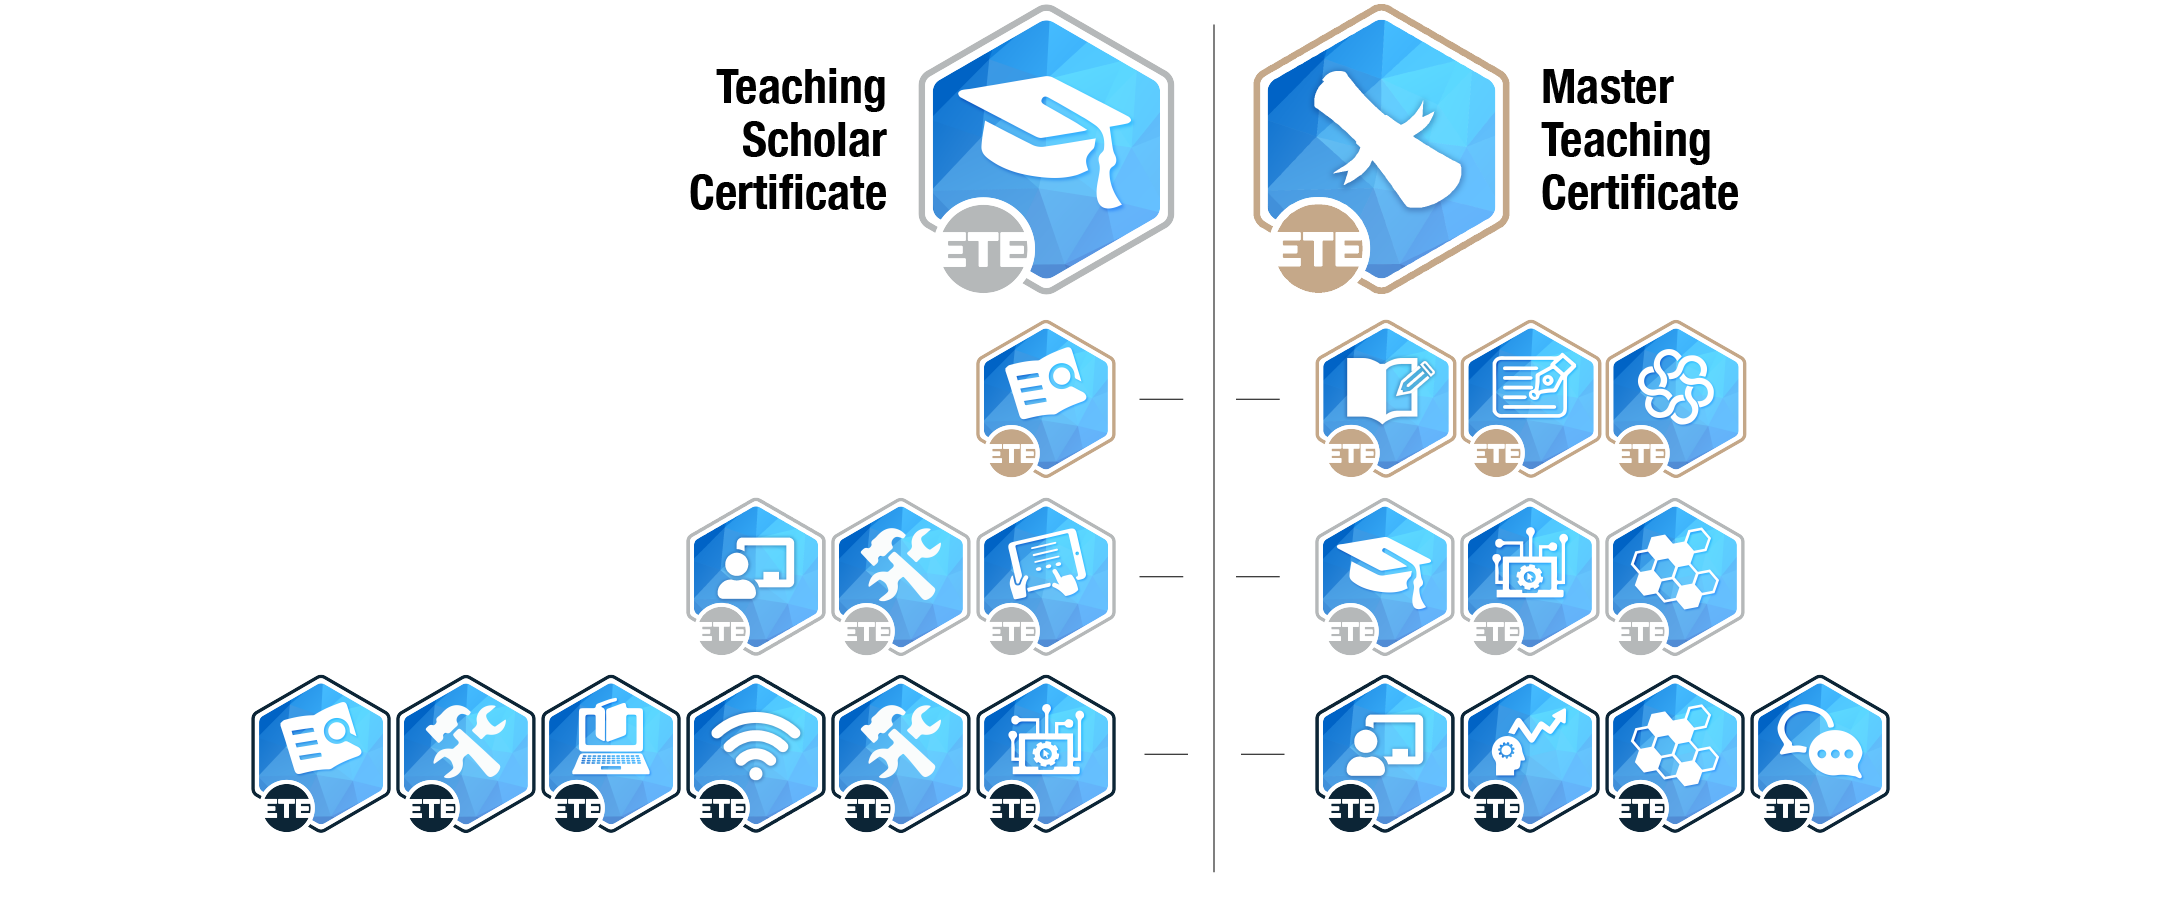 Badges stack to create the certificate